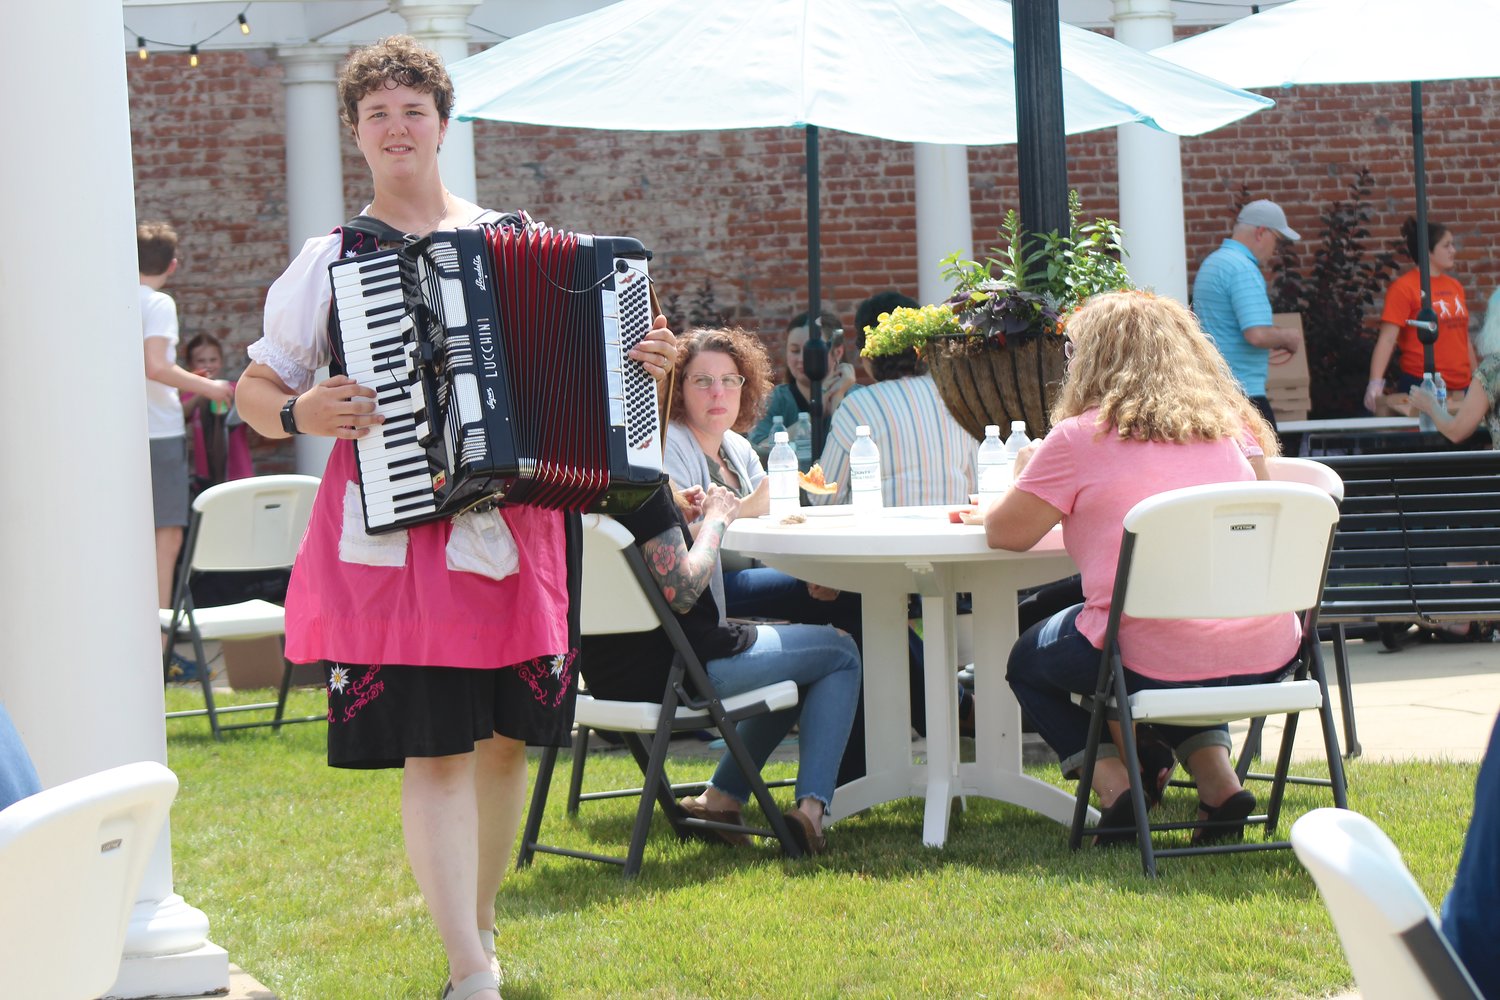 Josie Murray performs Friday on the accordion during the first Lunch on the Plaza event in downtown Crawfordsville. The annual lunch series takes place during the summer months and is sponsored by the Crawfordsville Main Street organization. The next event is slated for 11:30 a.m. to 1 p.m. July 15 and will feature food from Aki Les Voy Takeria and entertainment by Lee Douma & Co. The final lunch is Aug. 19 with food from Francis & Mount and entertainment by Sharon McKnight & Friends.